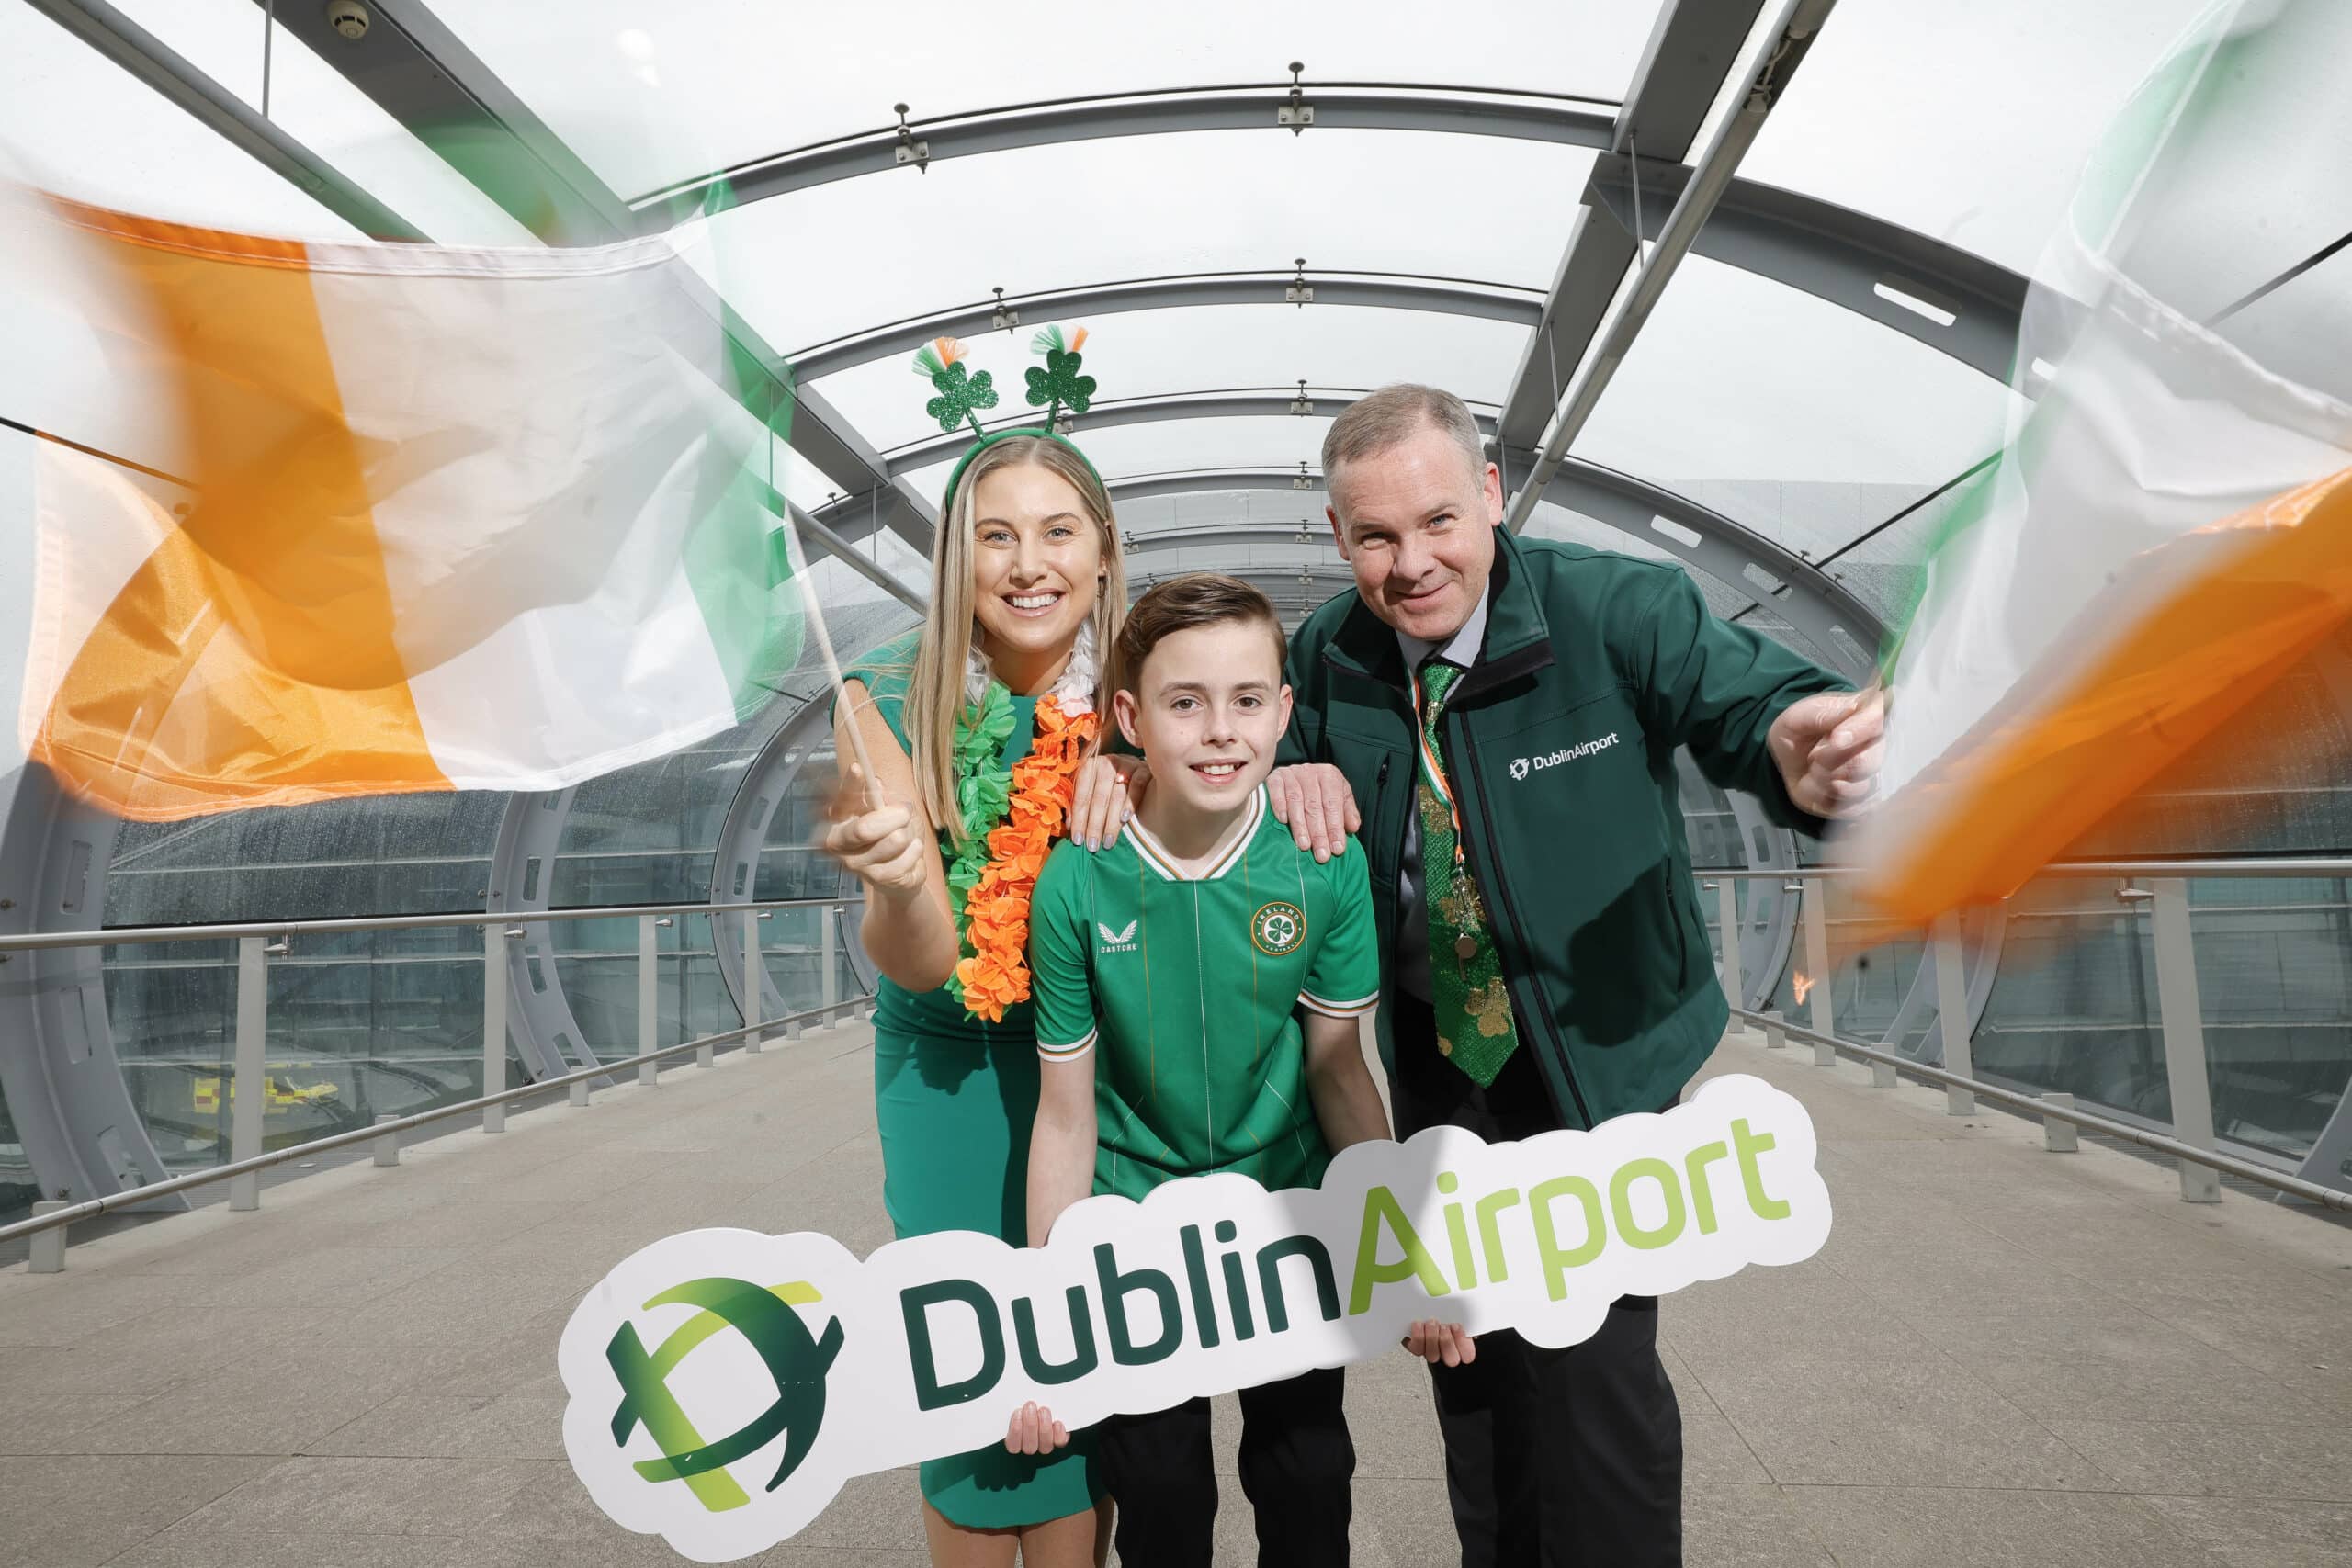 Dublin Airport St Patrick's Day